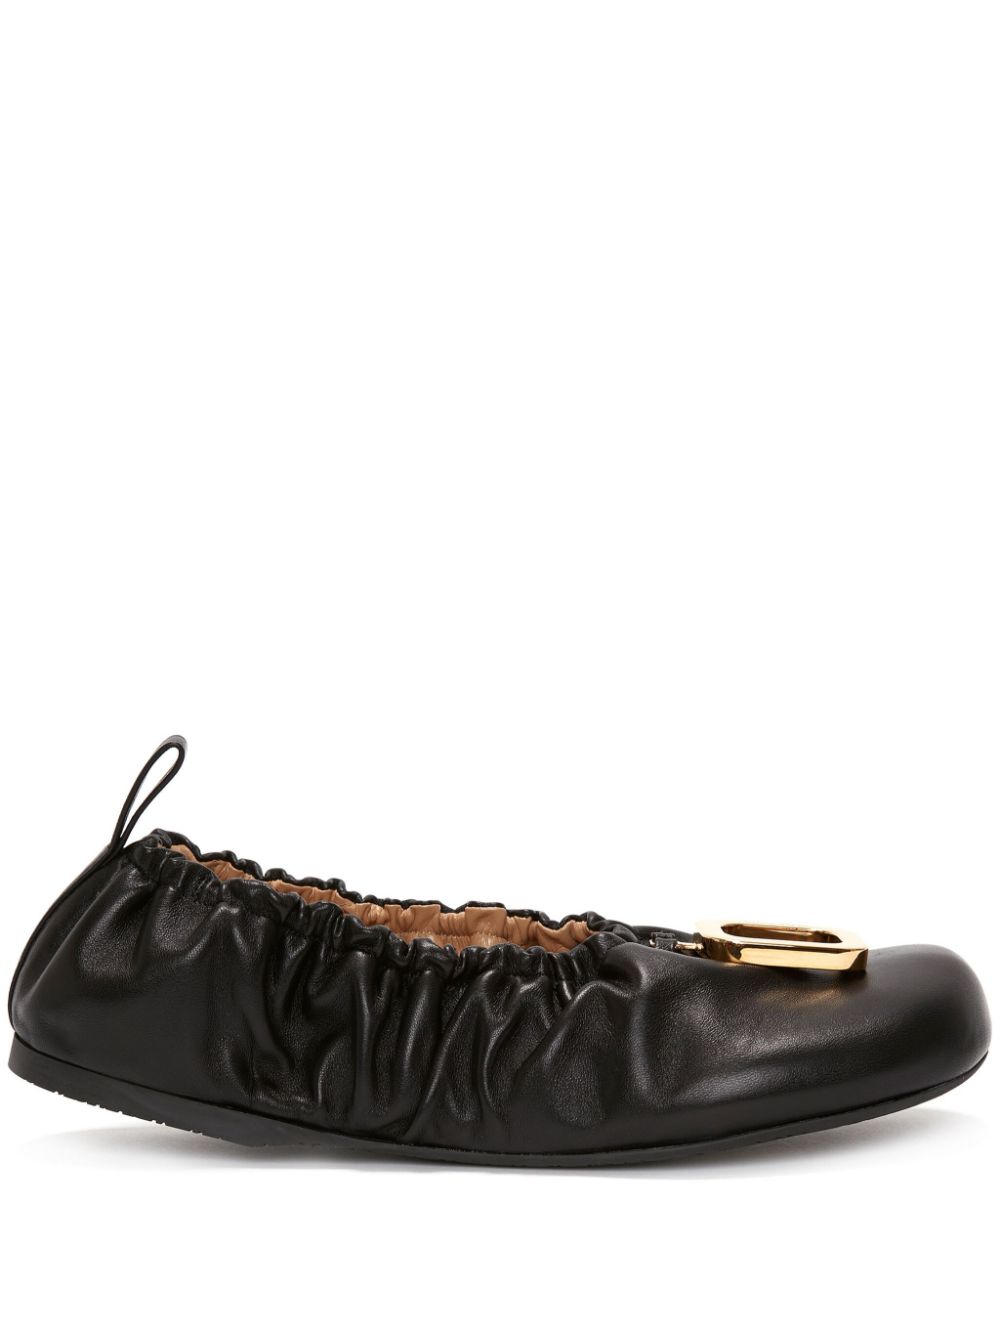 JW Anderson decorative-buckle leather ballerina shoes - Black